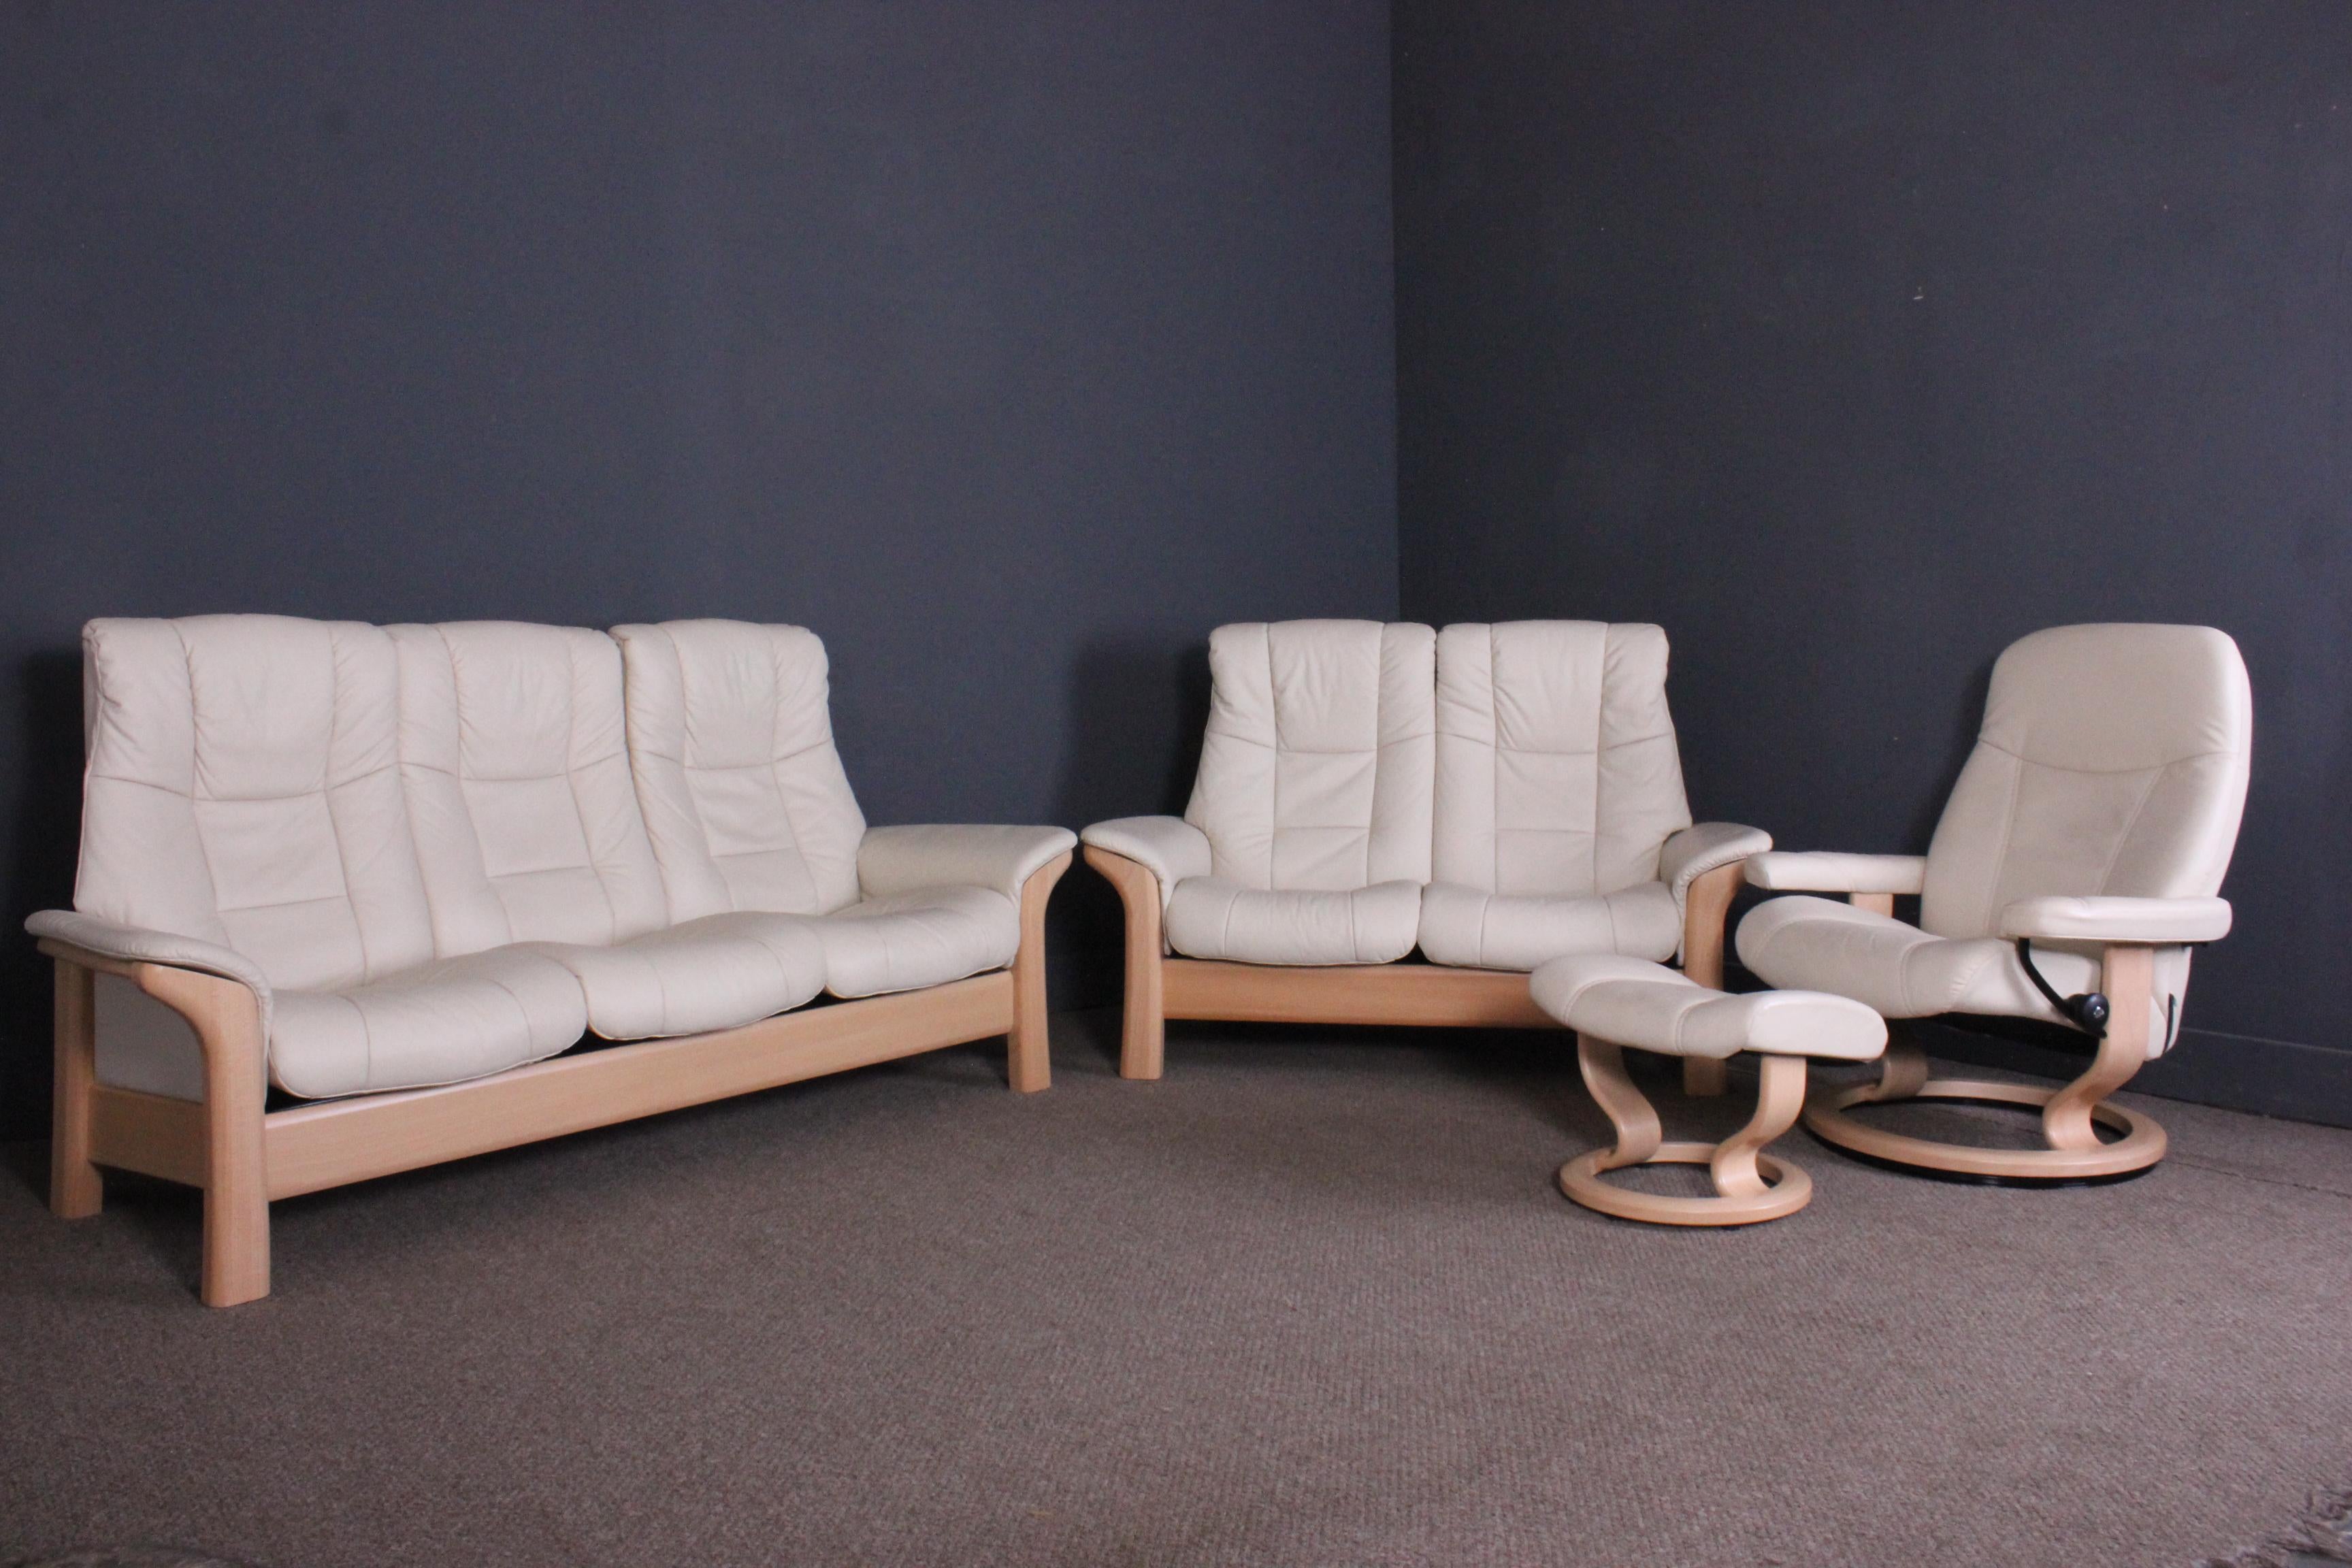 Beautiful Ekornes stressless windsor leather sofas with a matching stressless ambassador leather chair and footstool. They are all ivory in color and are in excellent condition with no marks or damage to either the leather or the wooden bases. Both